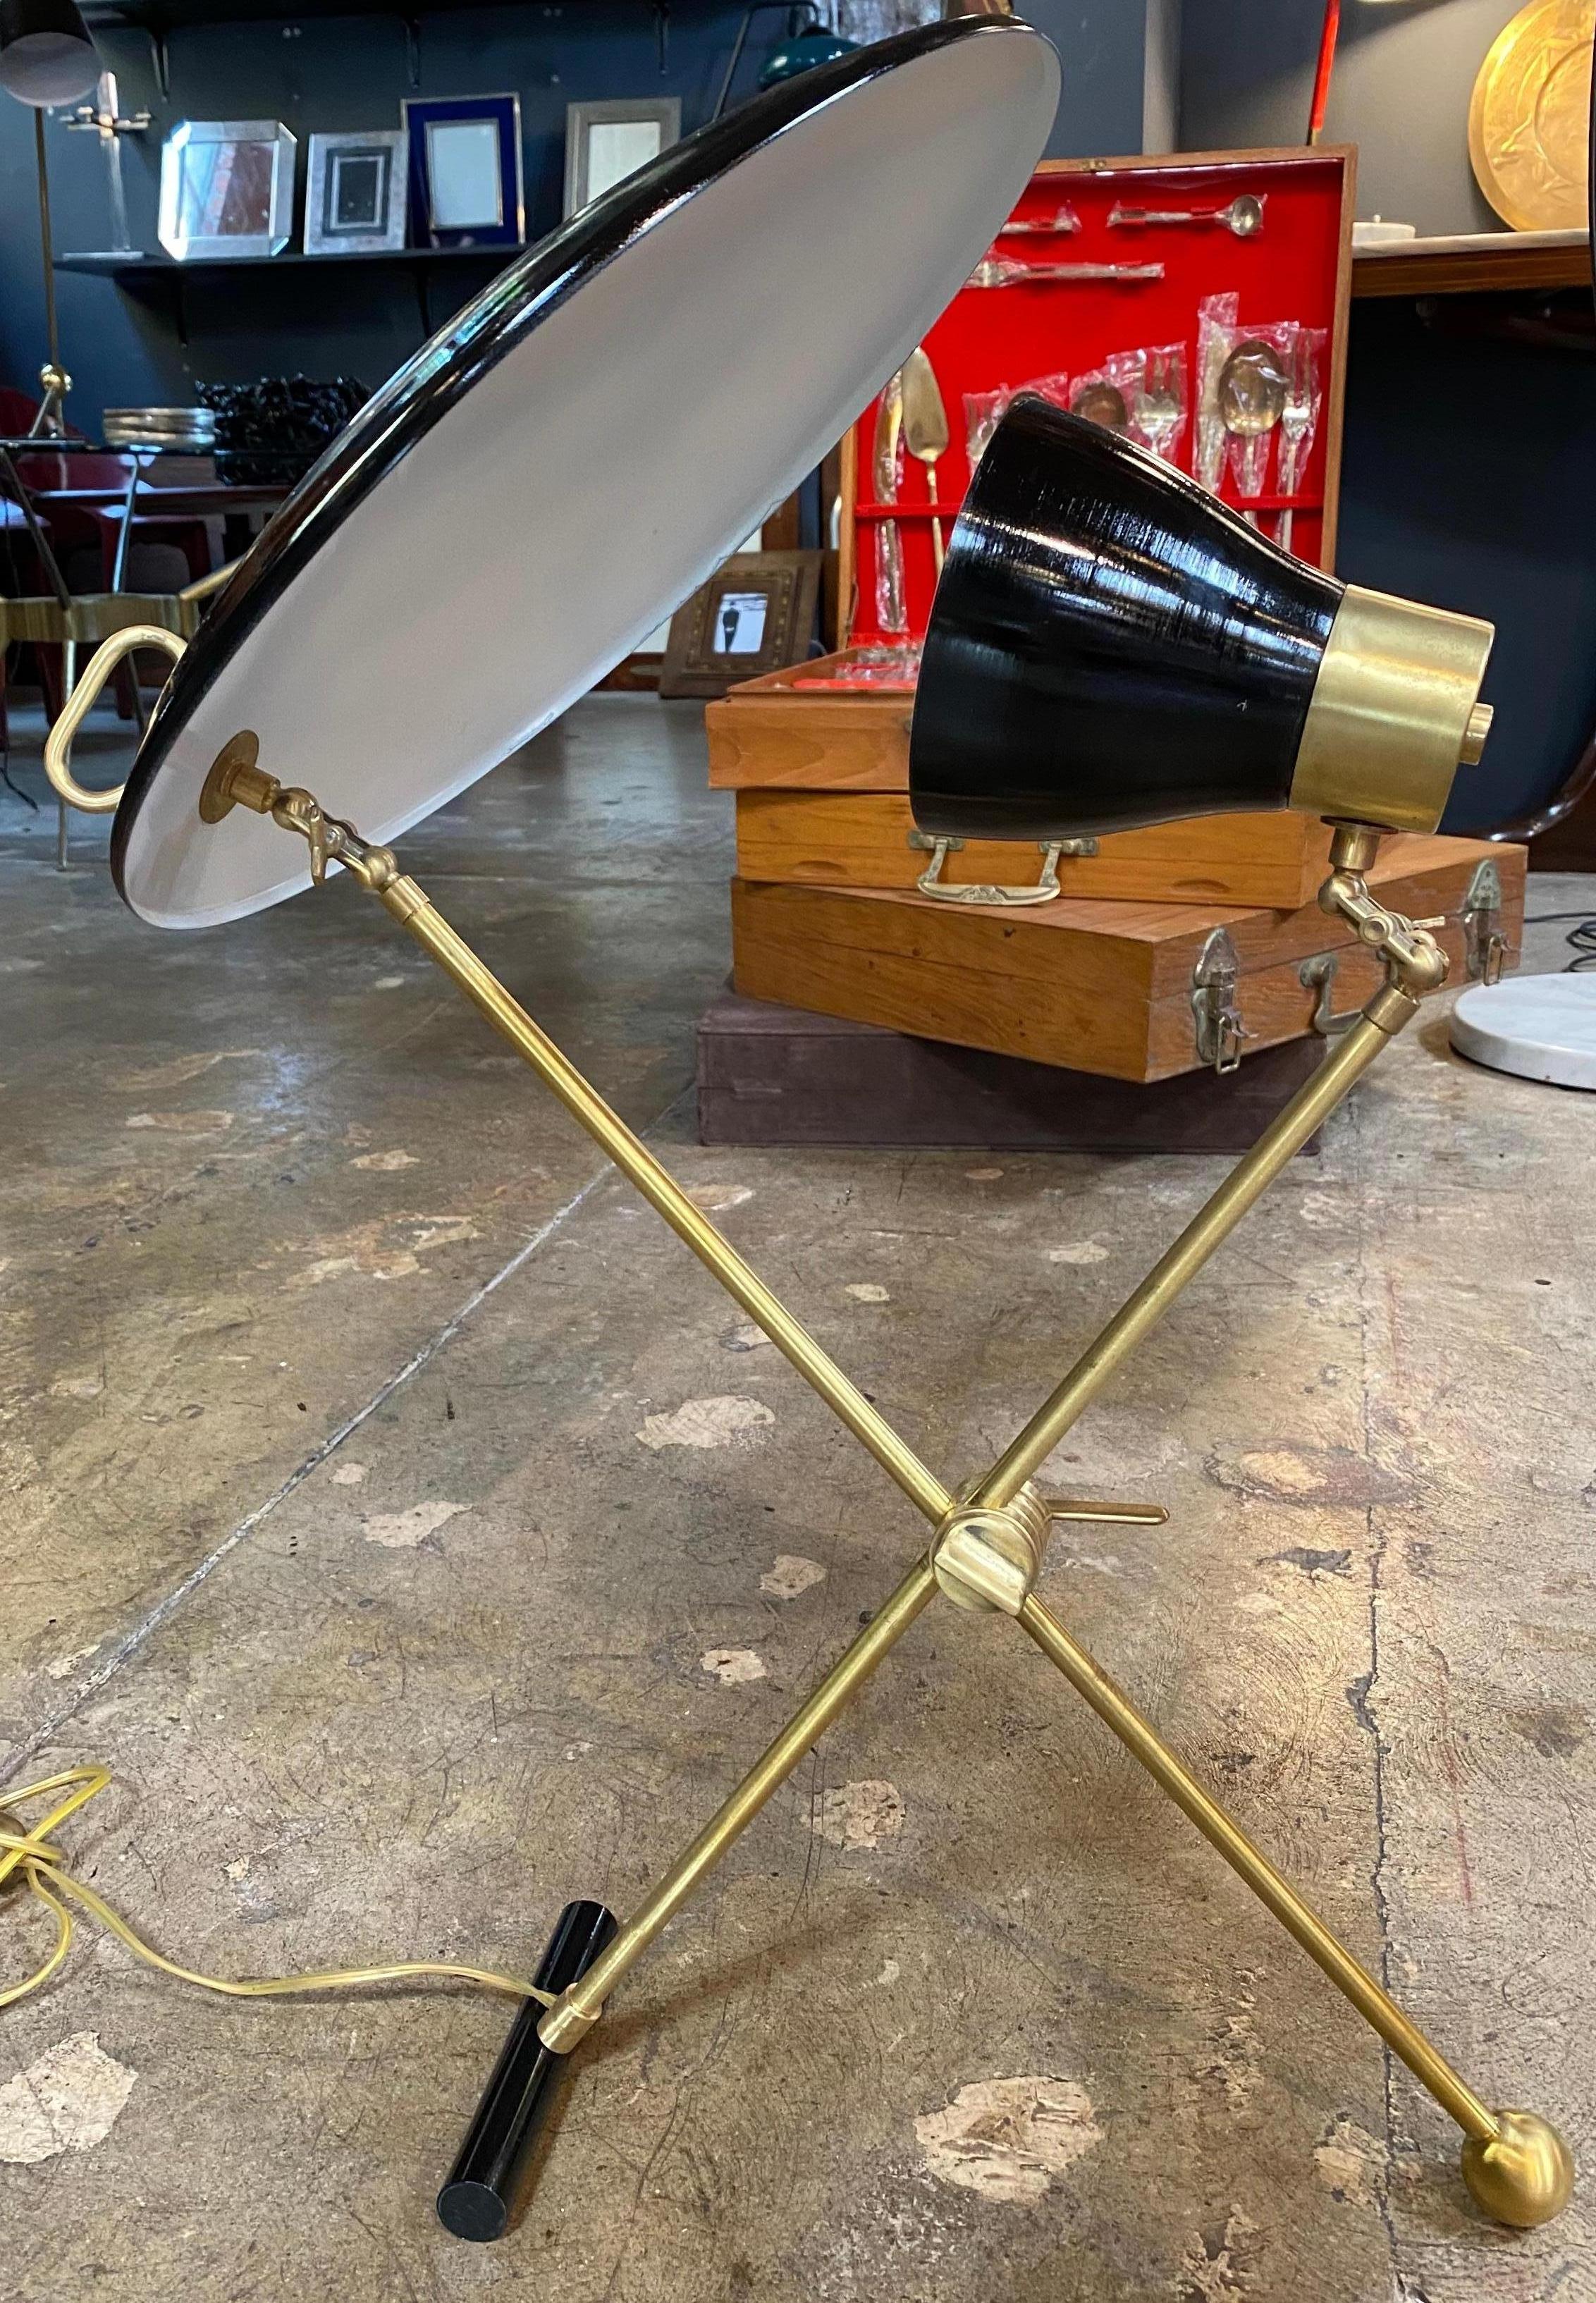 Awesome 1950s Italian midcentury table lamp. With upright brass plated lampshade and goose neck reflecting lampshade. Metal pieces are black lacquered. Both lampshades are adjustable.